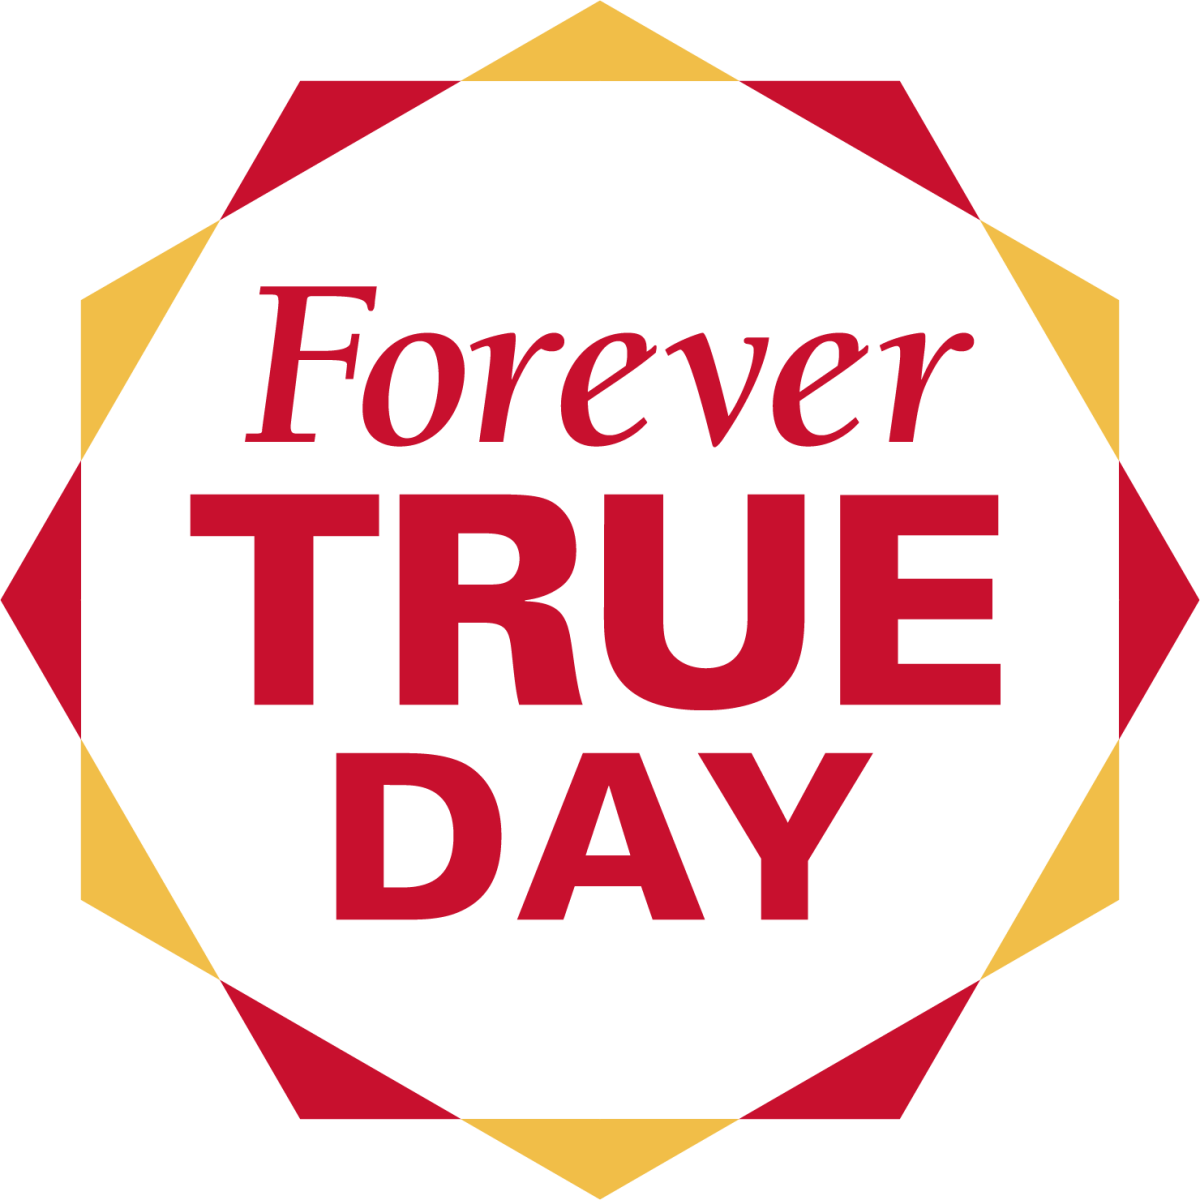 Forever True Day graphic